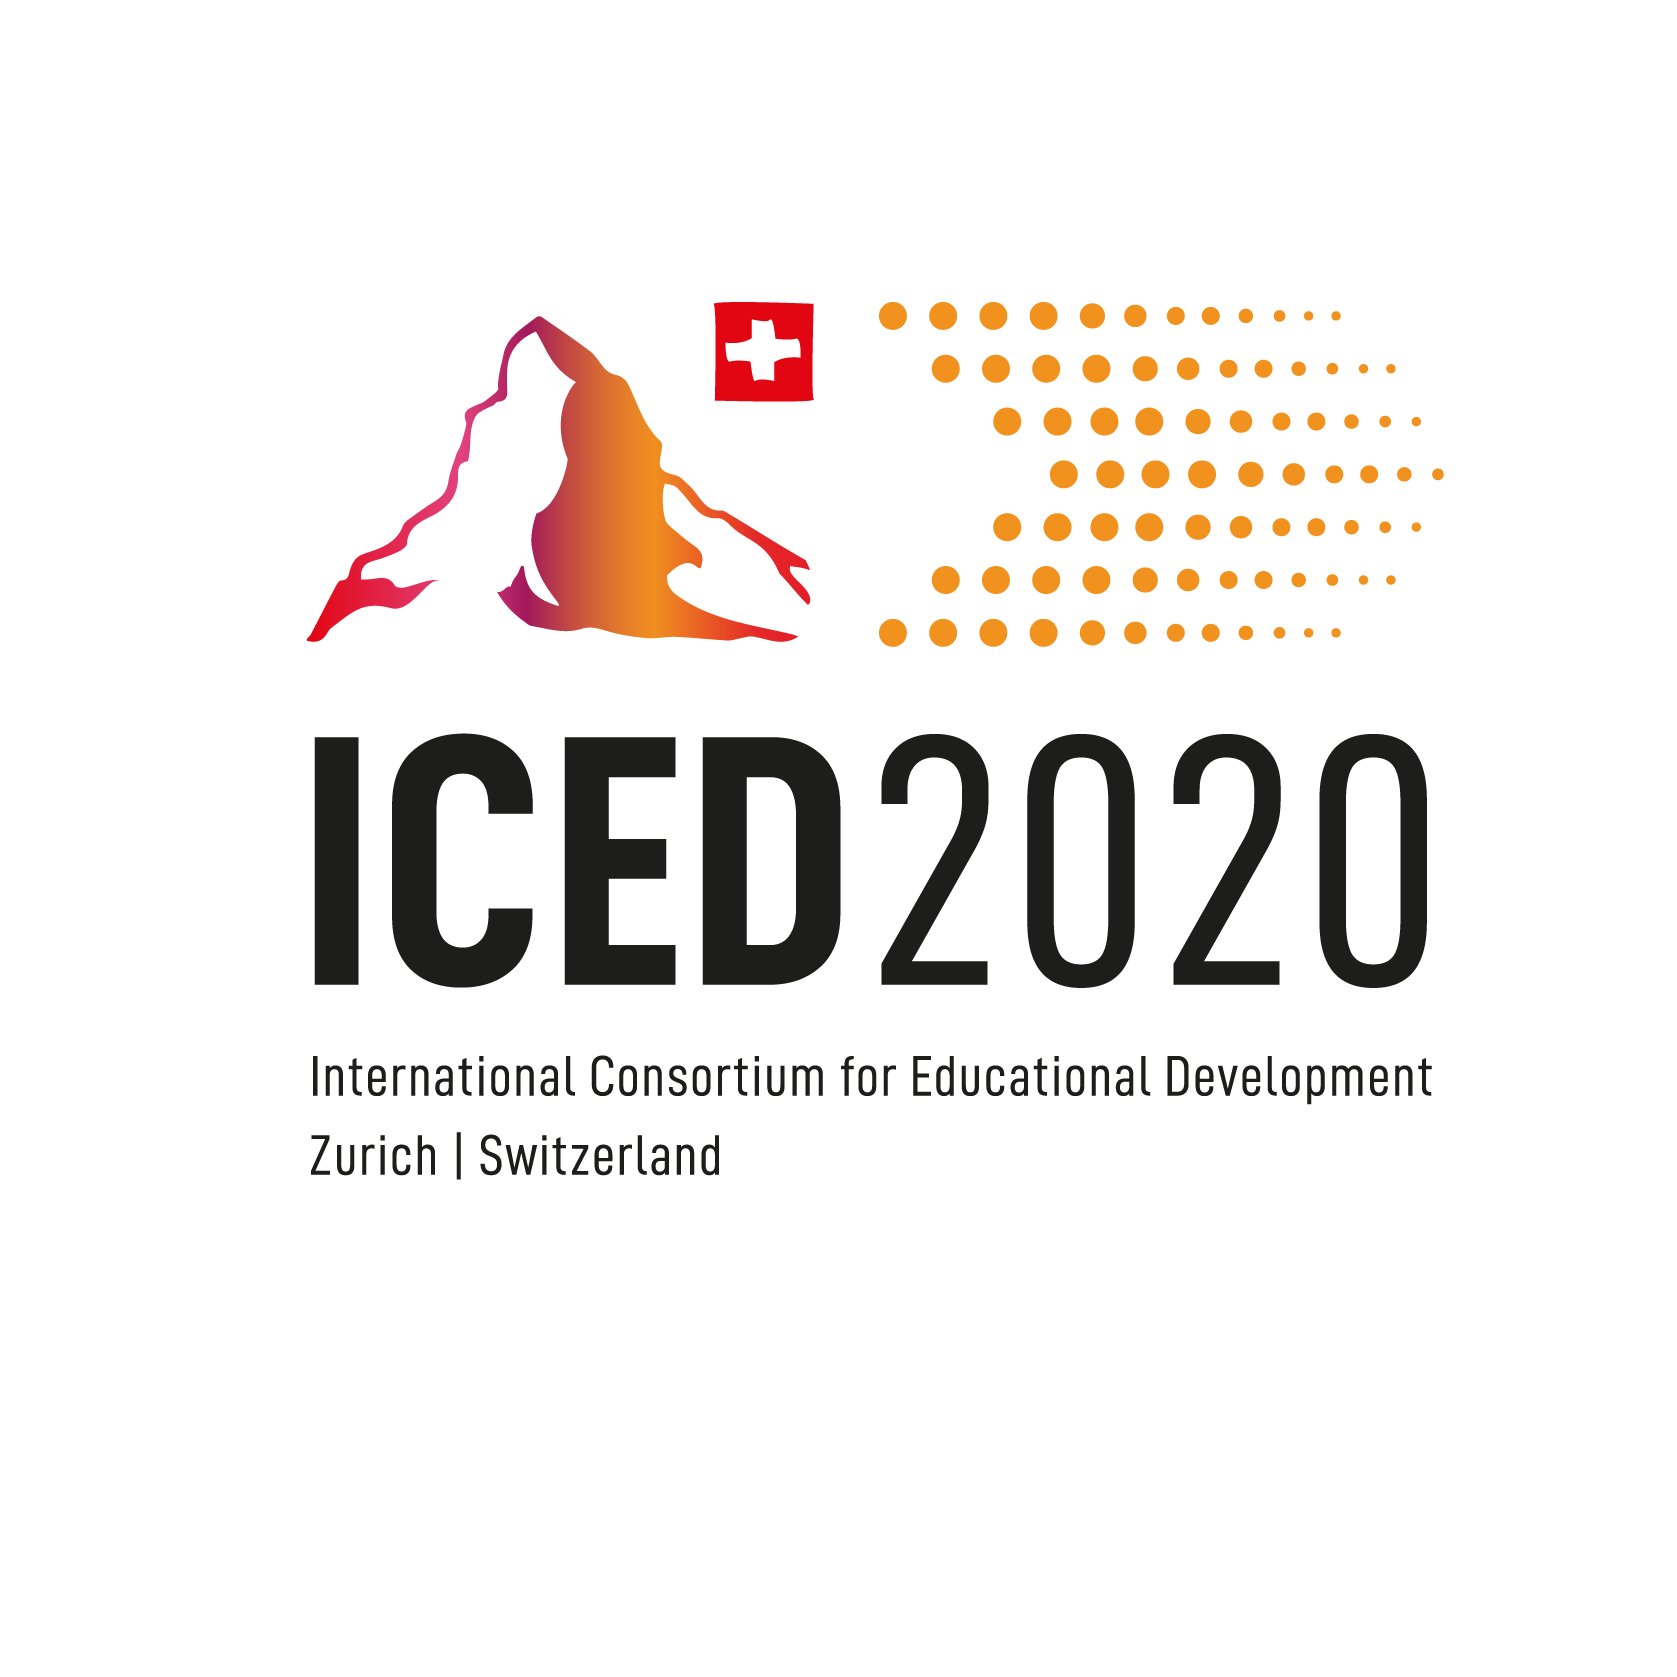 Official twitter account of the ICED2020 conference taking place 15-18 June 2020 at ETH Zurich, Switzerland. Account managed by Karin & Philip. #2020iced #ETH